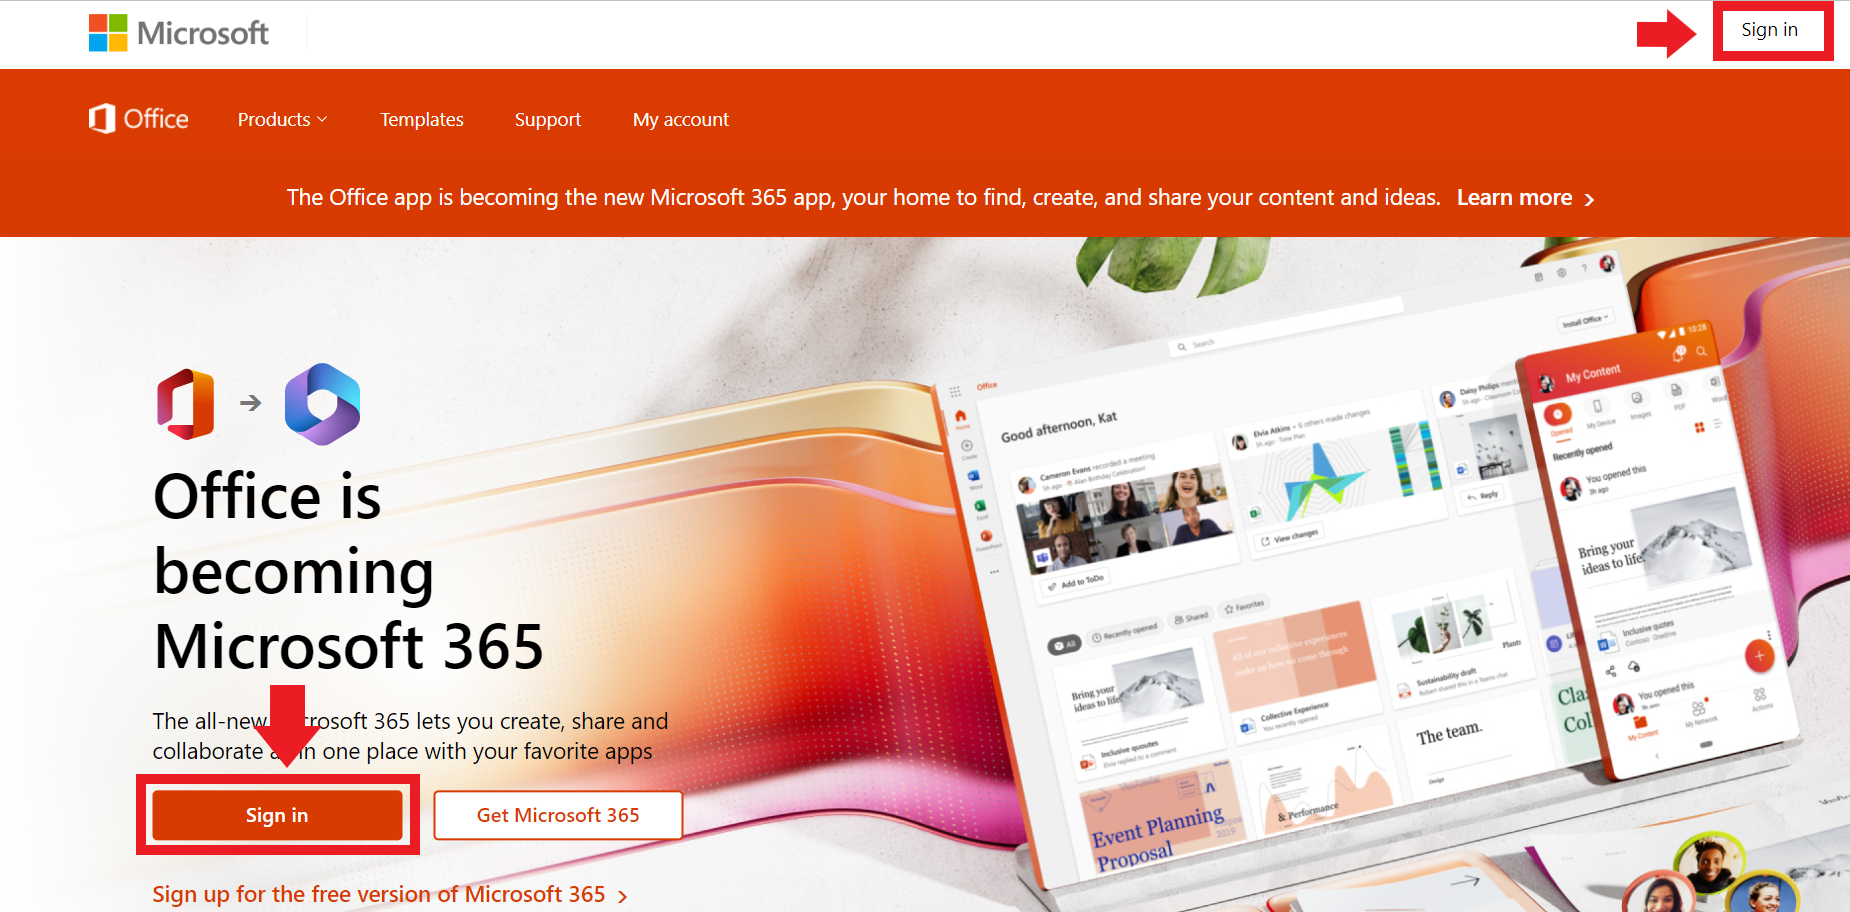 The Microsoft Office homepage with sign-in options